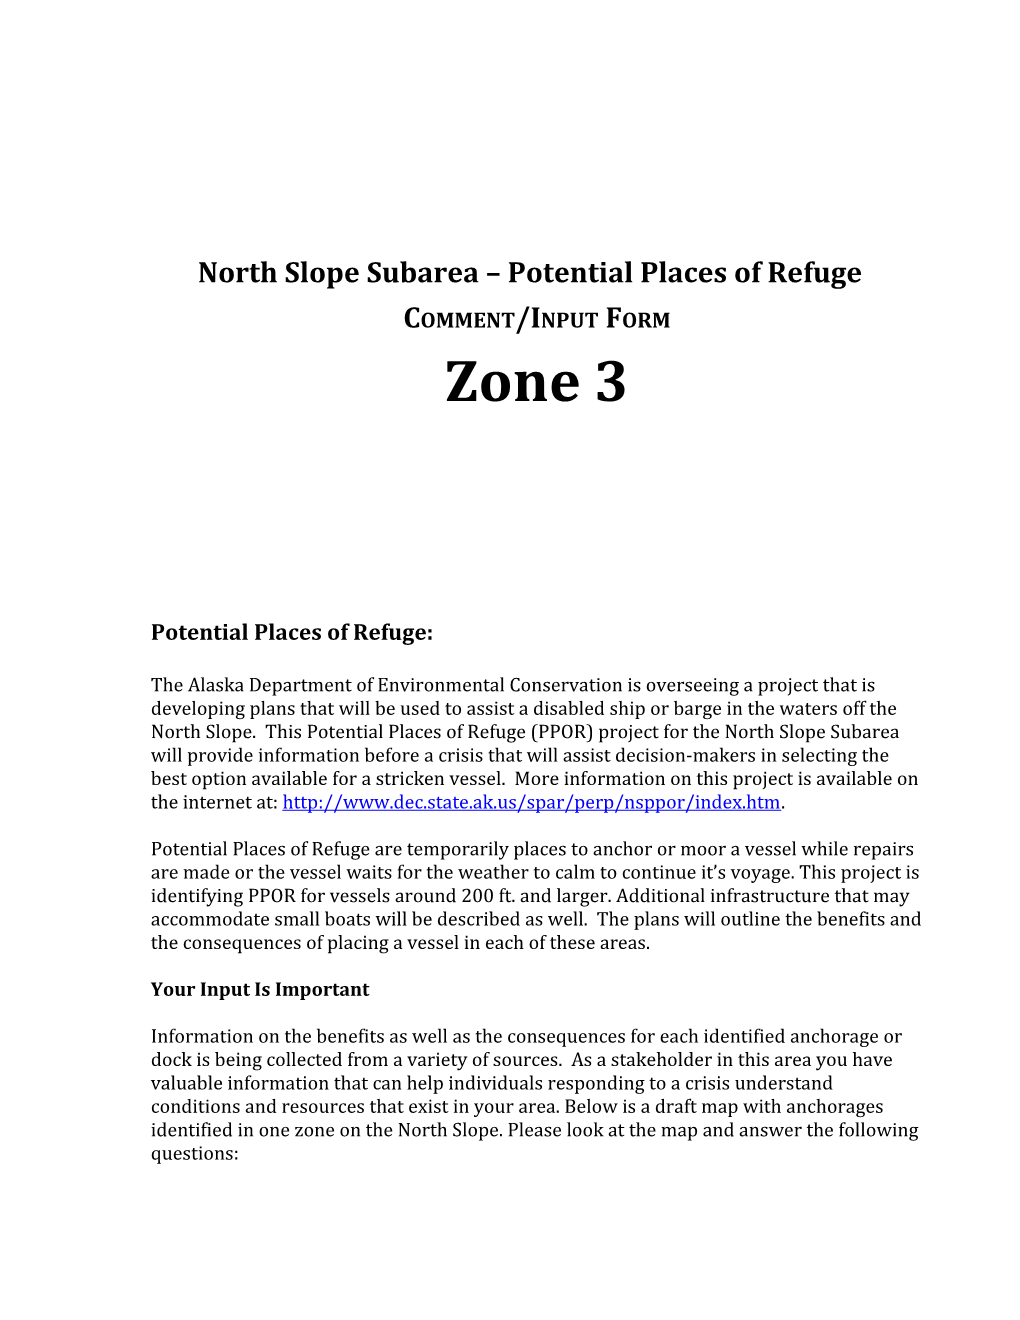 North Slope Subarea Potential Places of Refuge